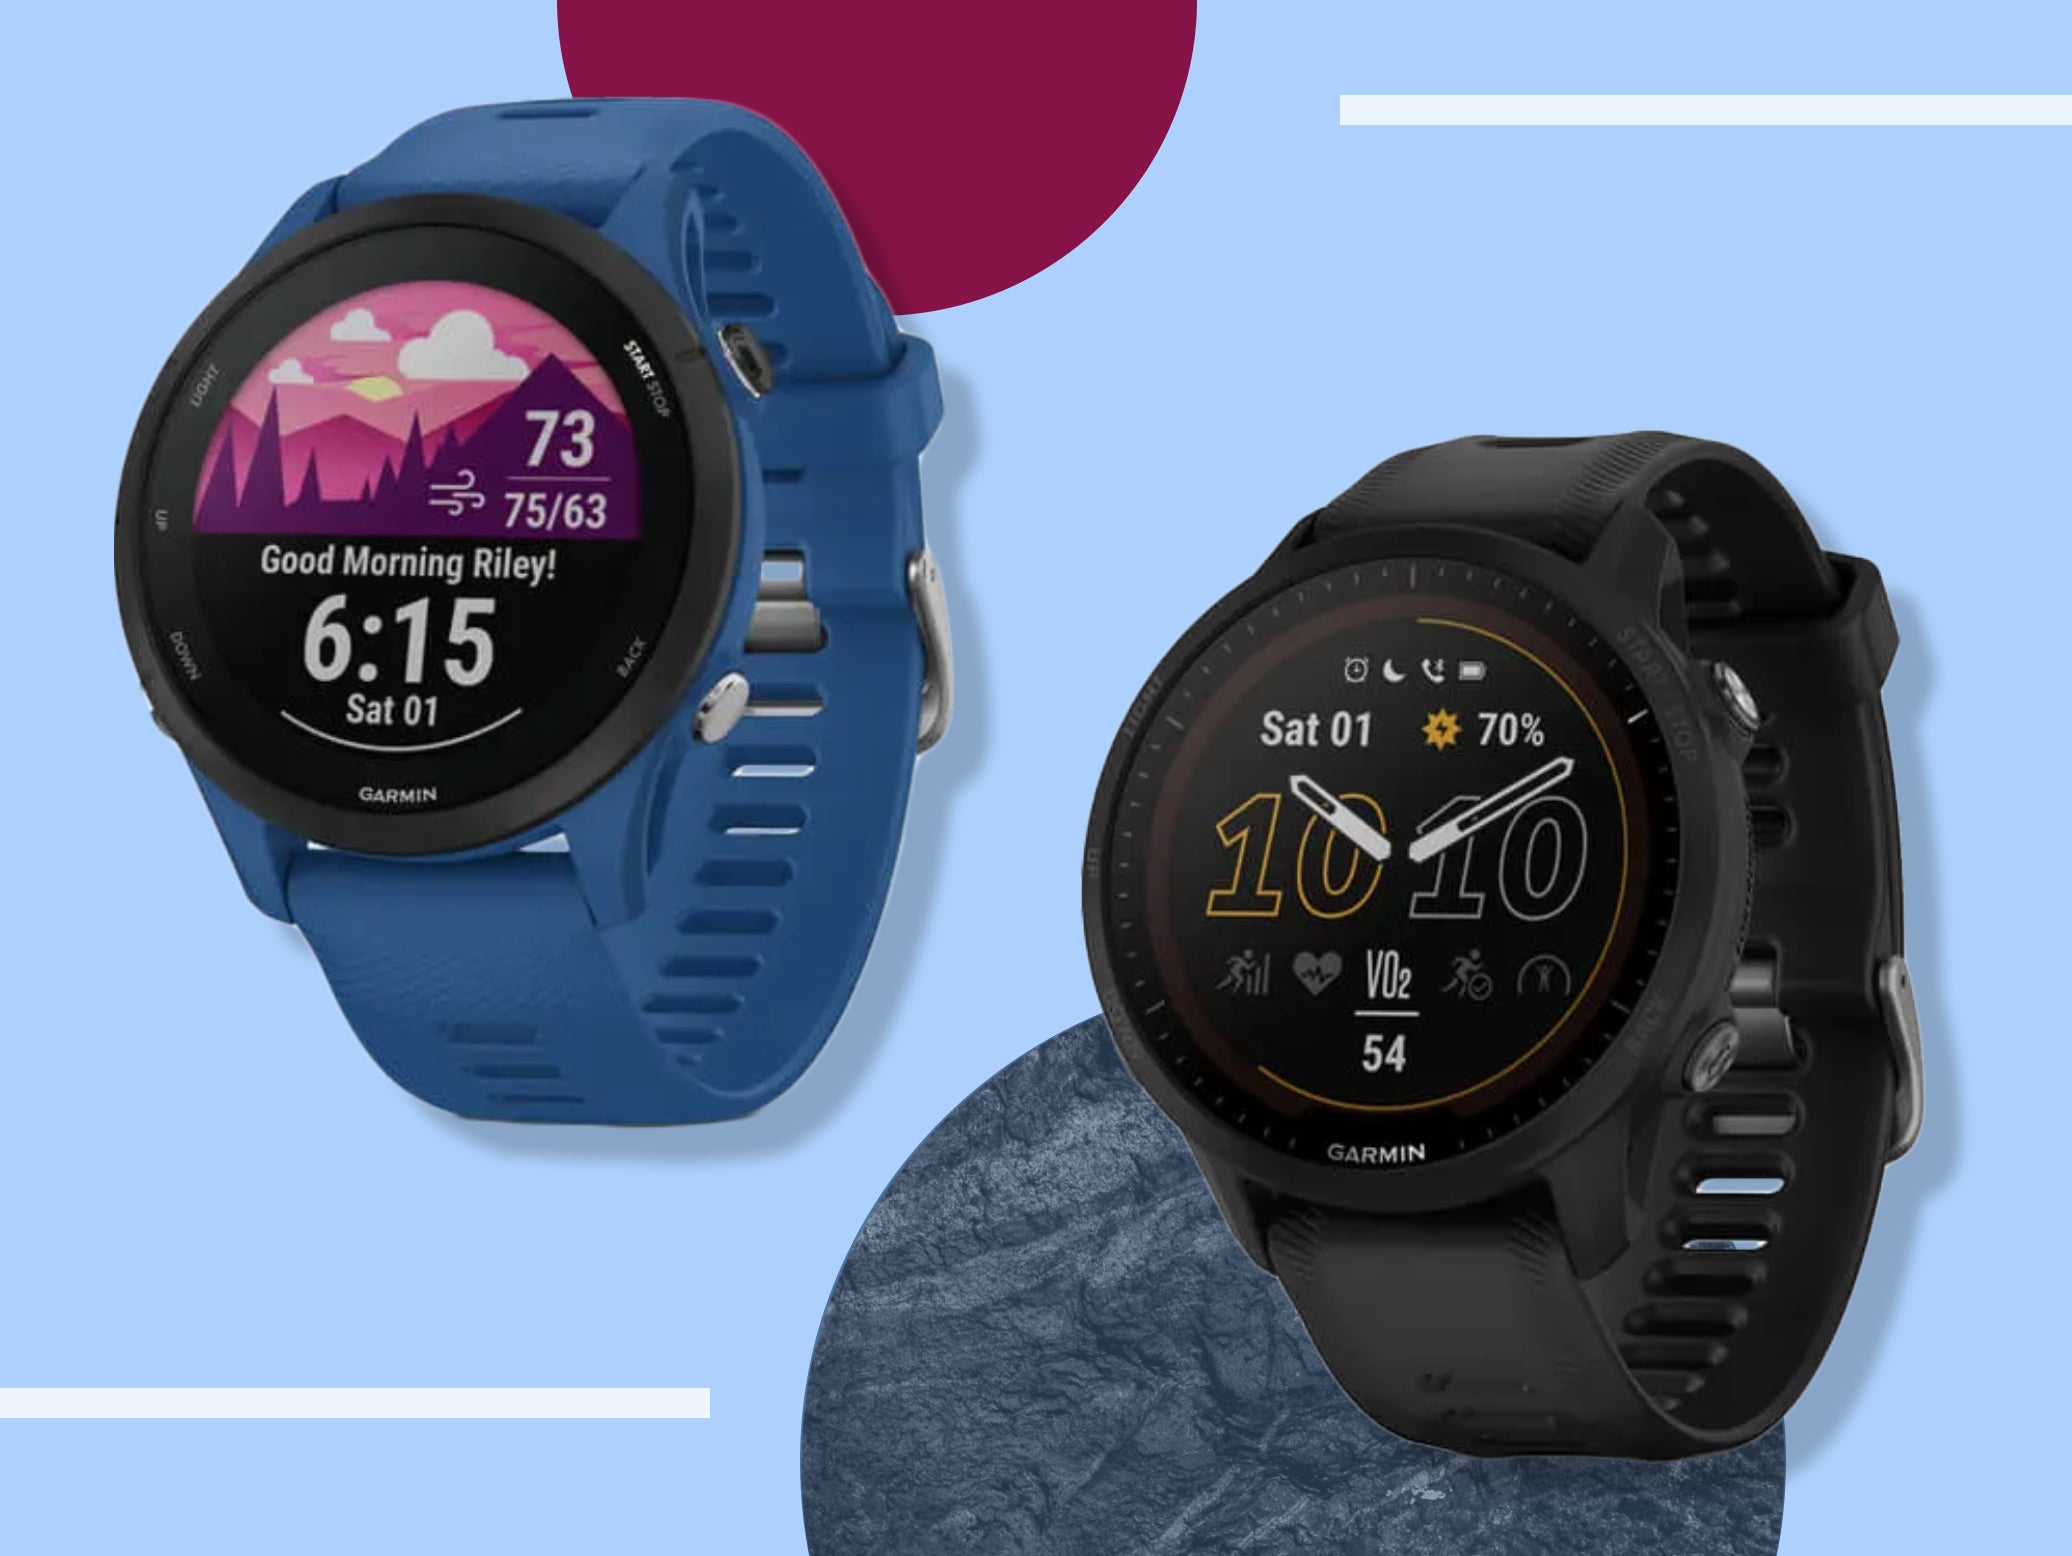 The wearables are available now and should begin shipping by mid-June